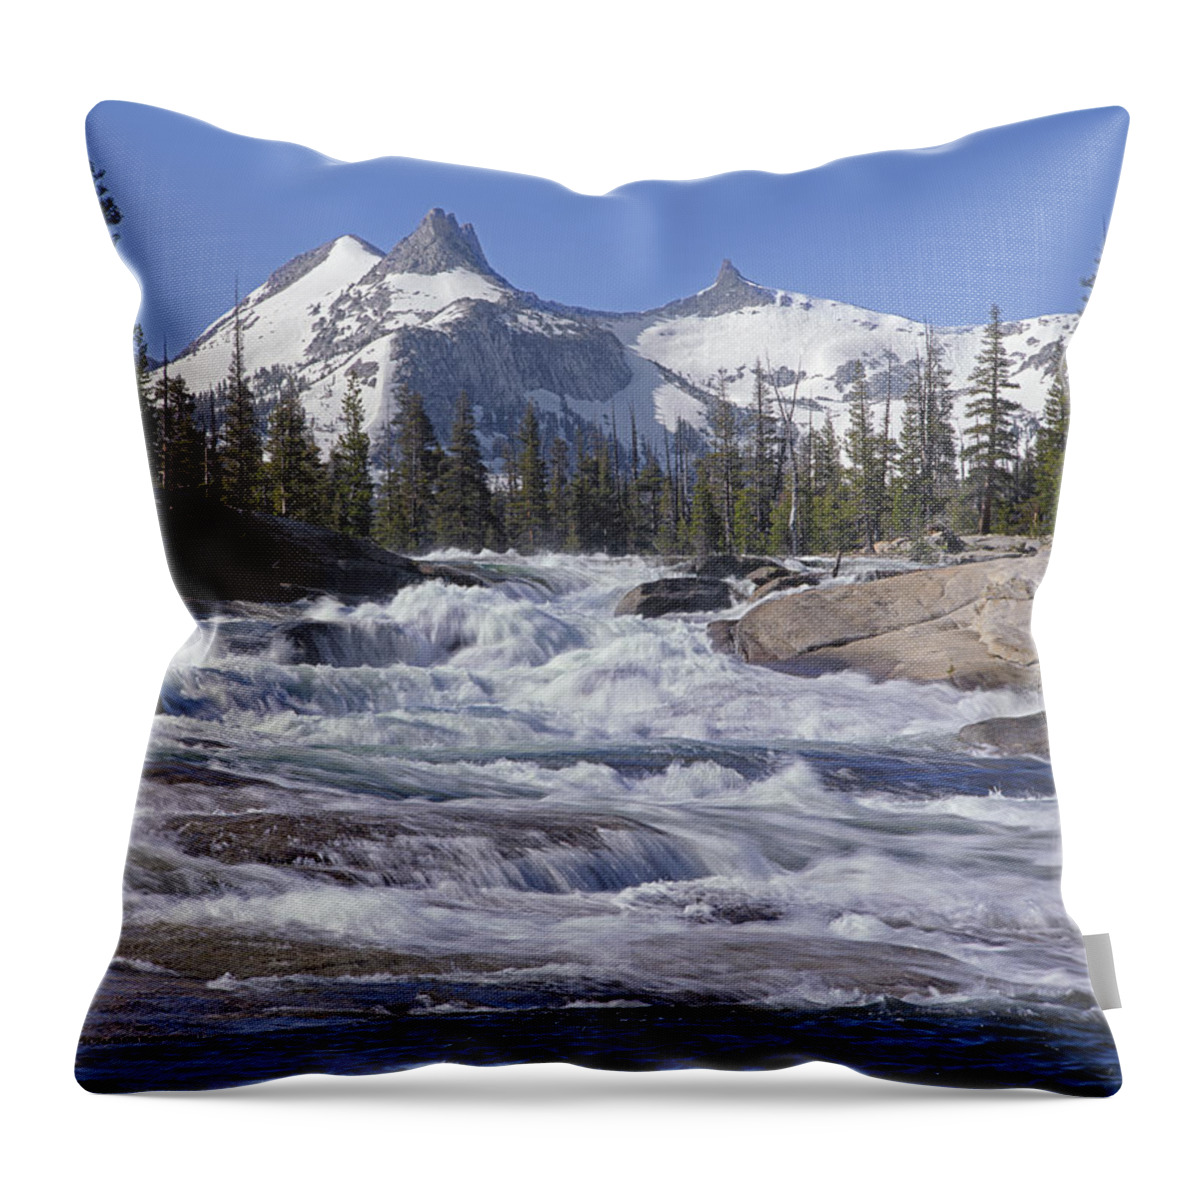 Tuolumne River Throw Pillow featuring the photograph 6M6539-Tuolumne River by Ed Cooper Photography